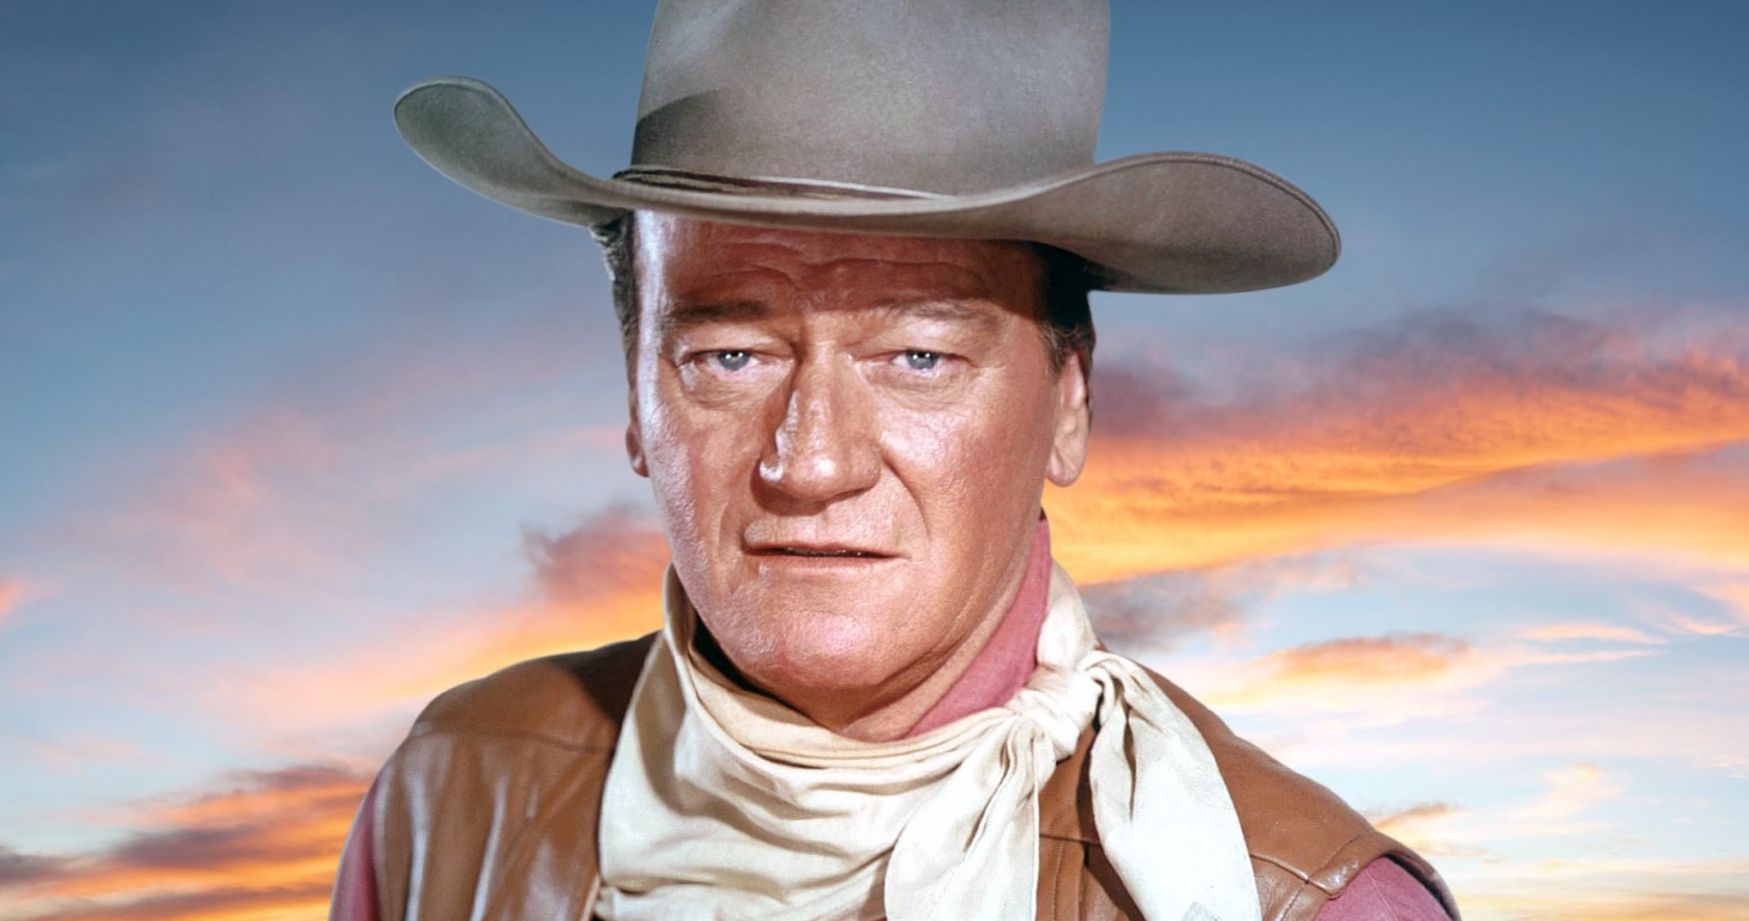 John Wayne Exhibit at USC Will Get Removed Due to Actor's Racist Statements